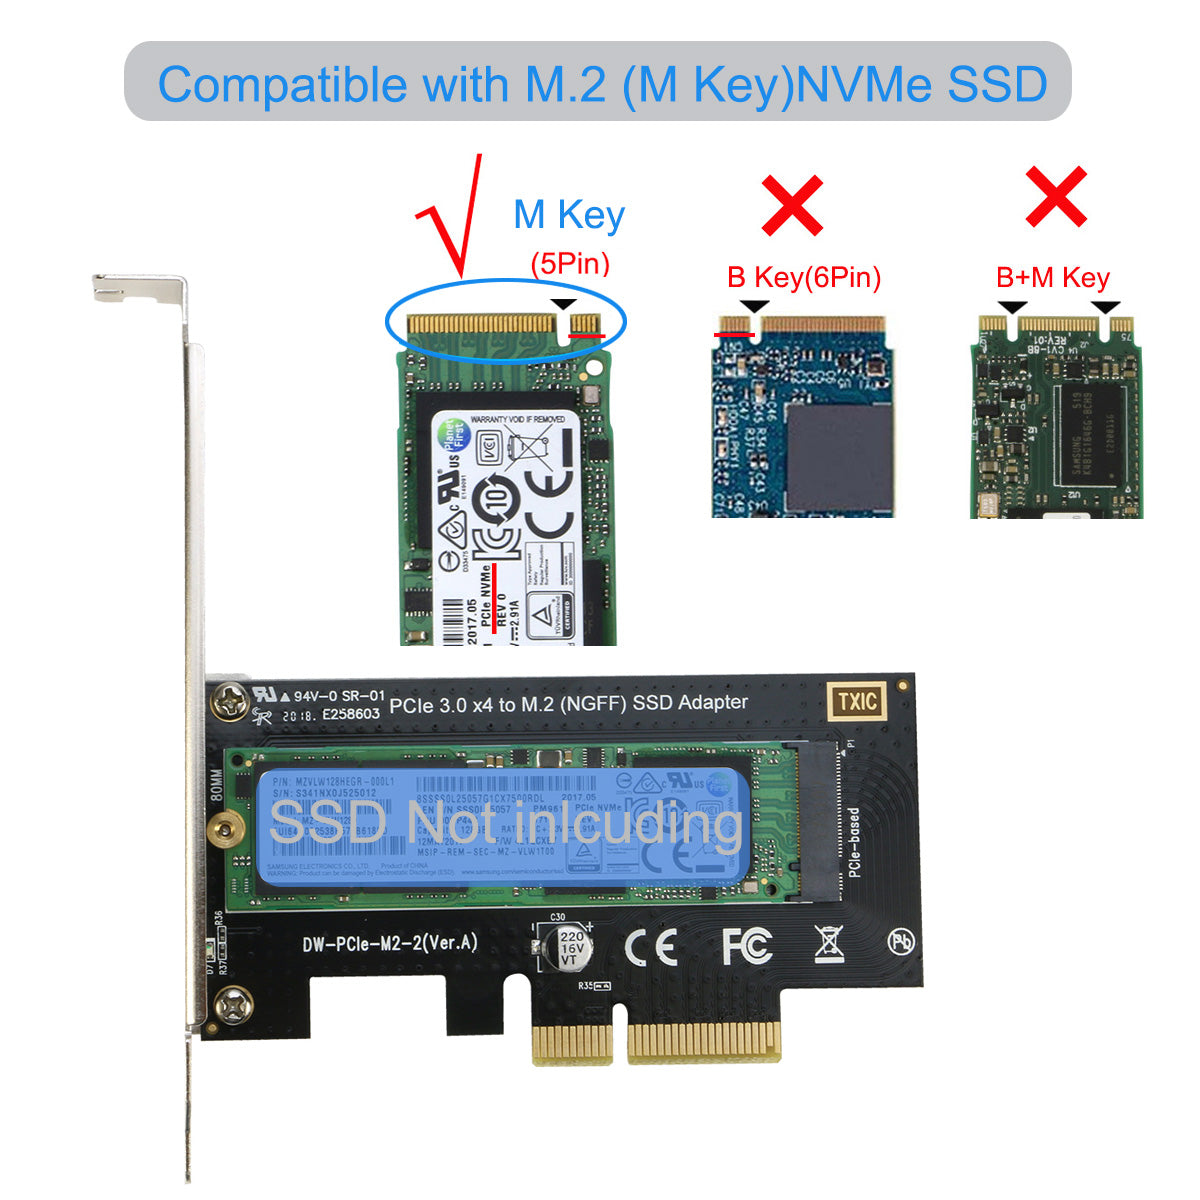 sofa Indstilling Massage RIITOP PCI-e Nvme M.2 Adapter NVMe or AHCI M Key SSD to PCIe 3.0 x 4 C